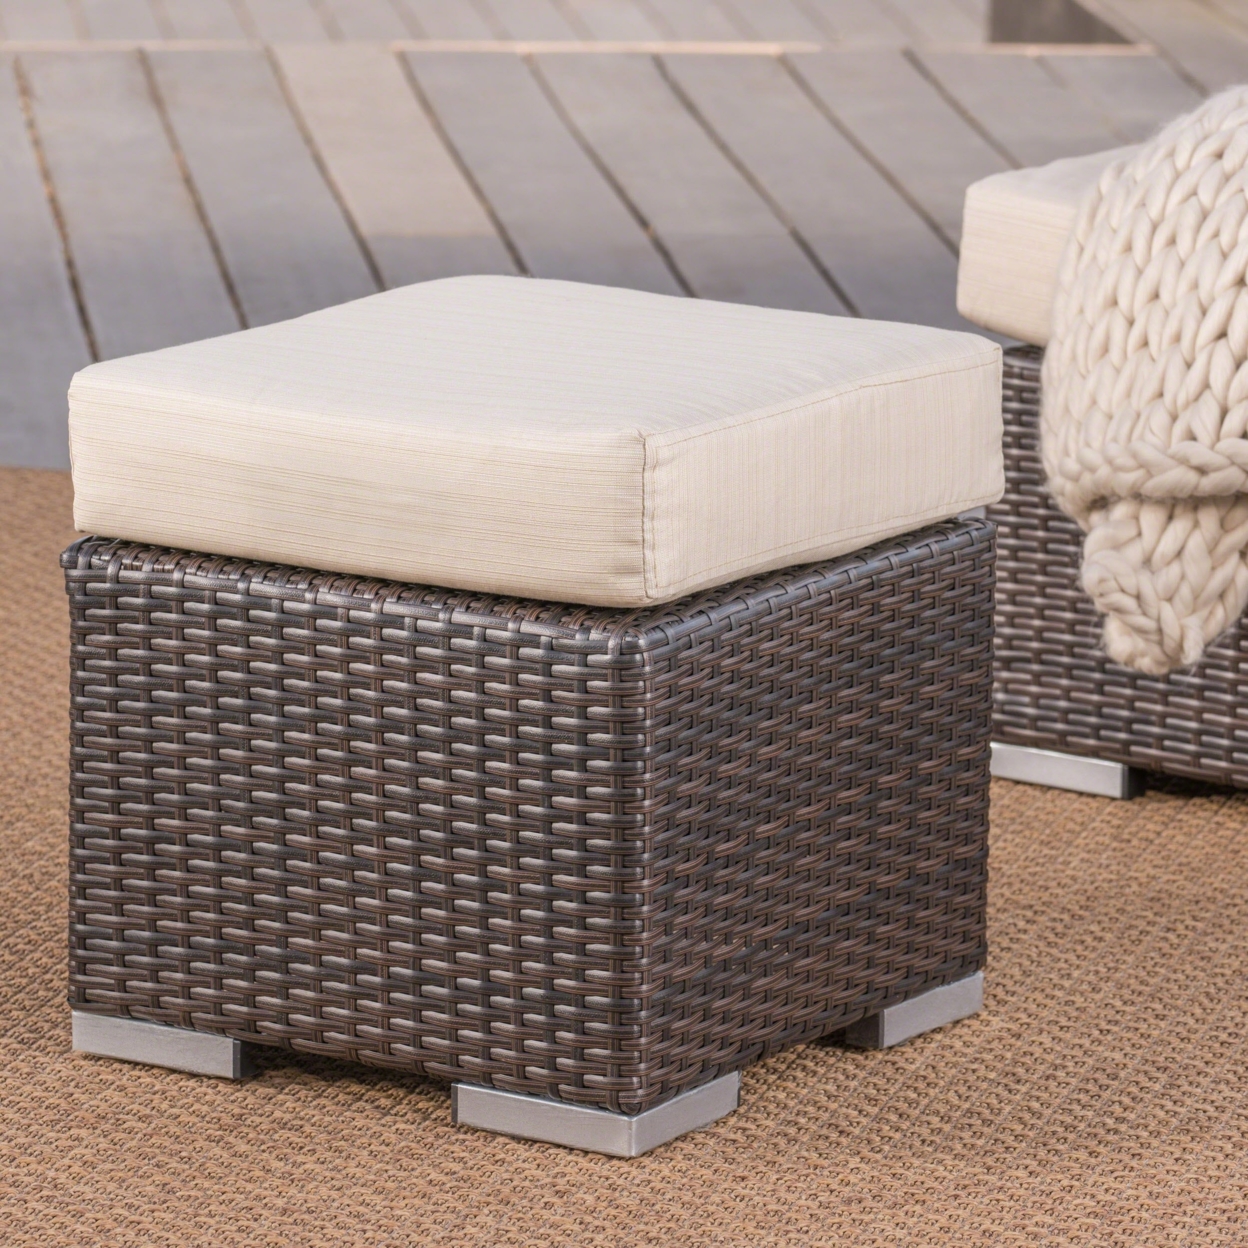 Santa Rosa Outdoor 16 Inch Wicker Ottoman Seat With Water Resistant Cushion - Gray/silver, Single